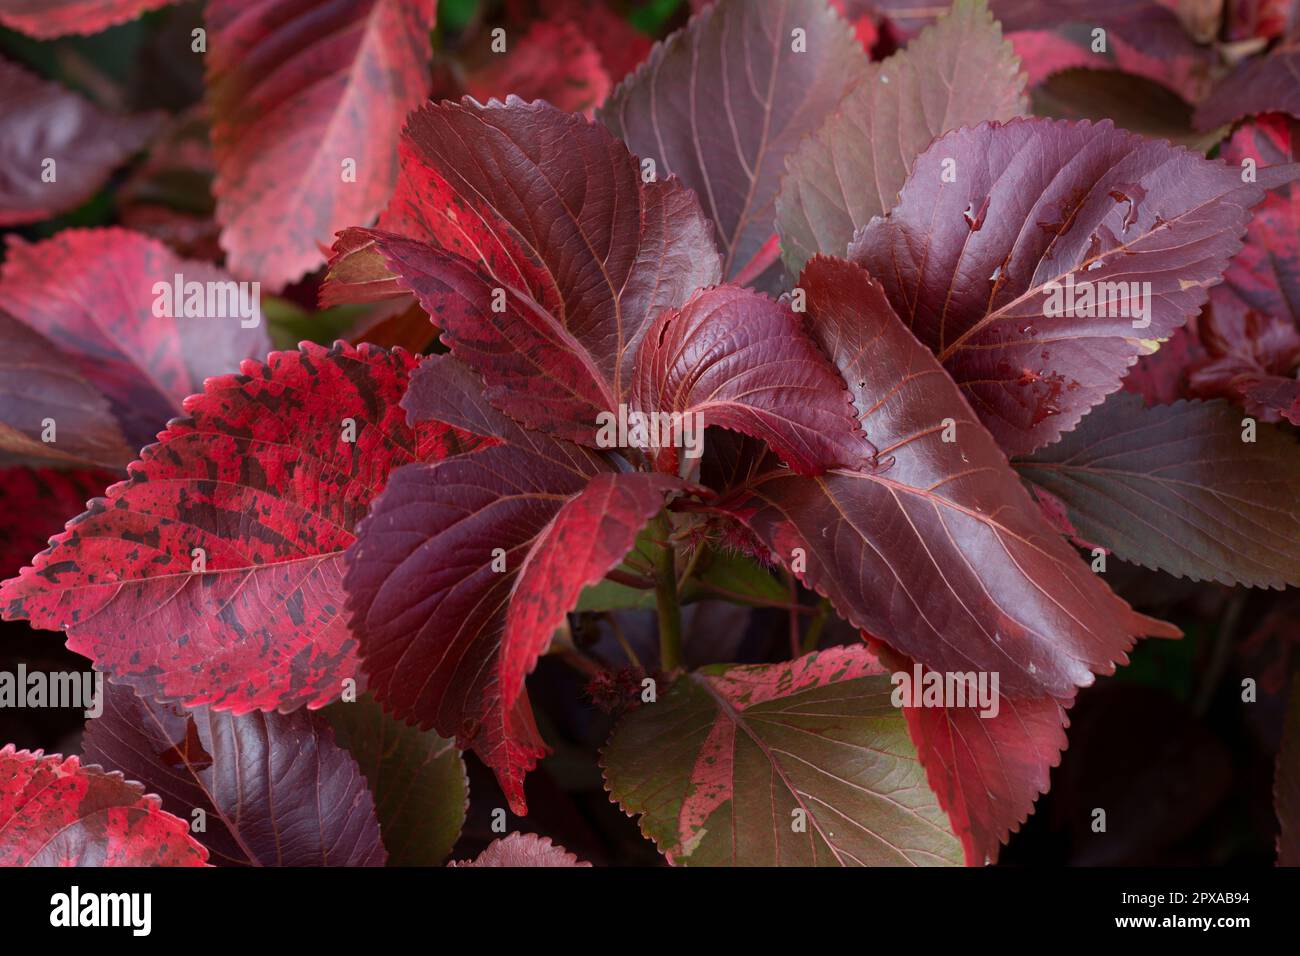 Red leaf Copperleaf or Acalypha wilkesiana or Mosaica ornamental house plant. background of red leaves Stock Photo